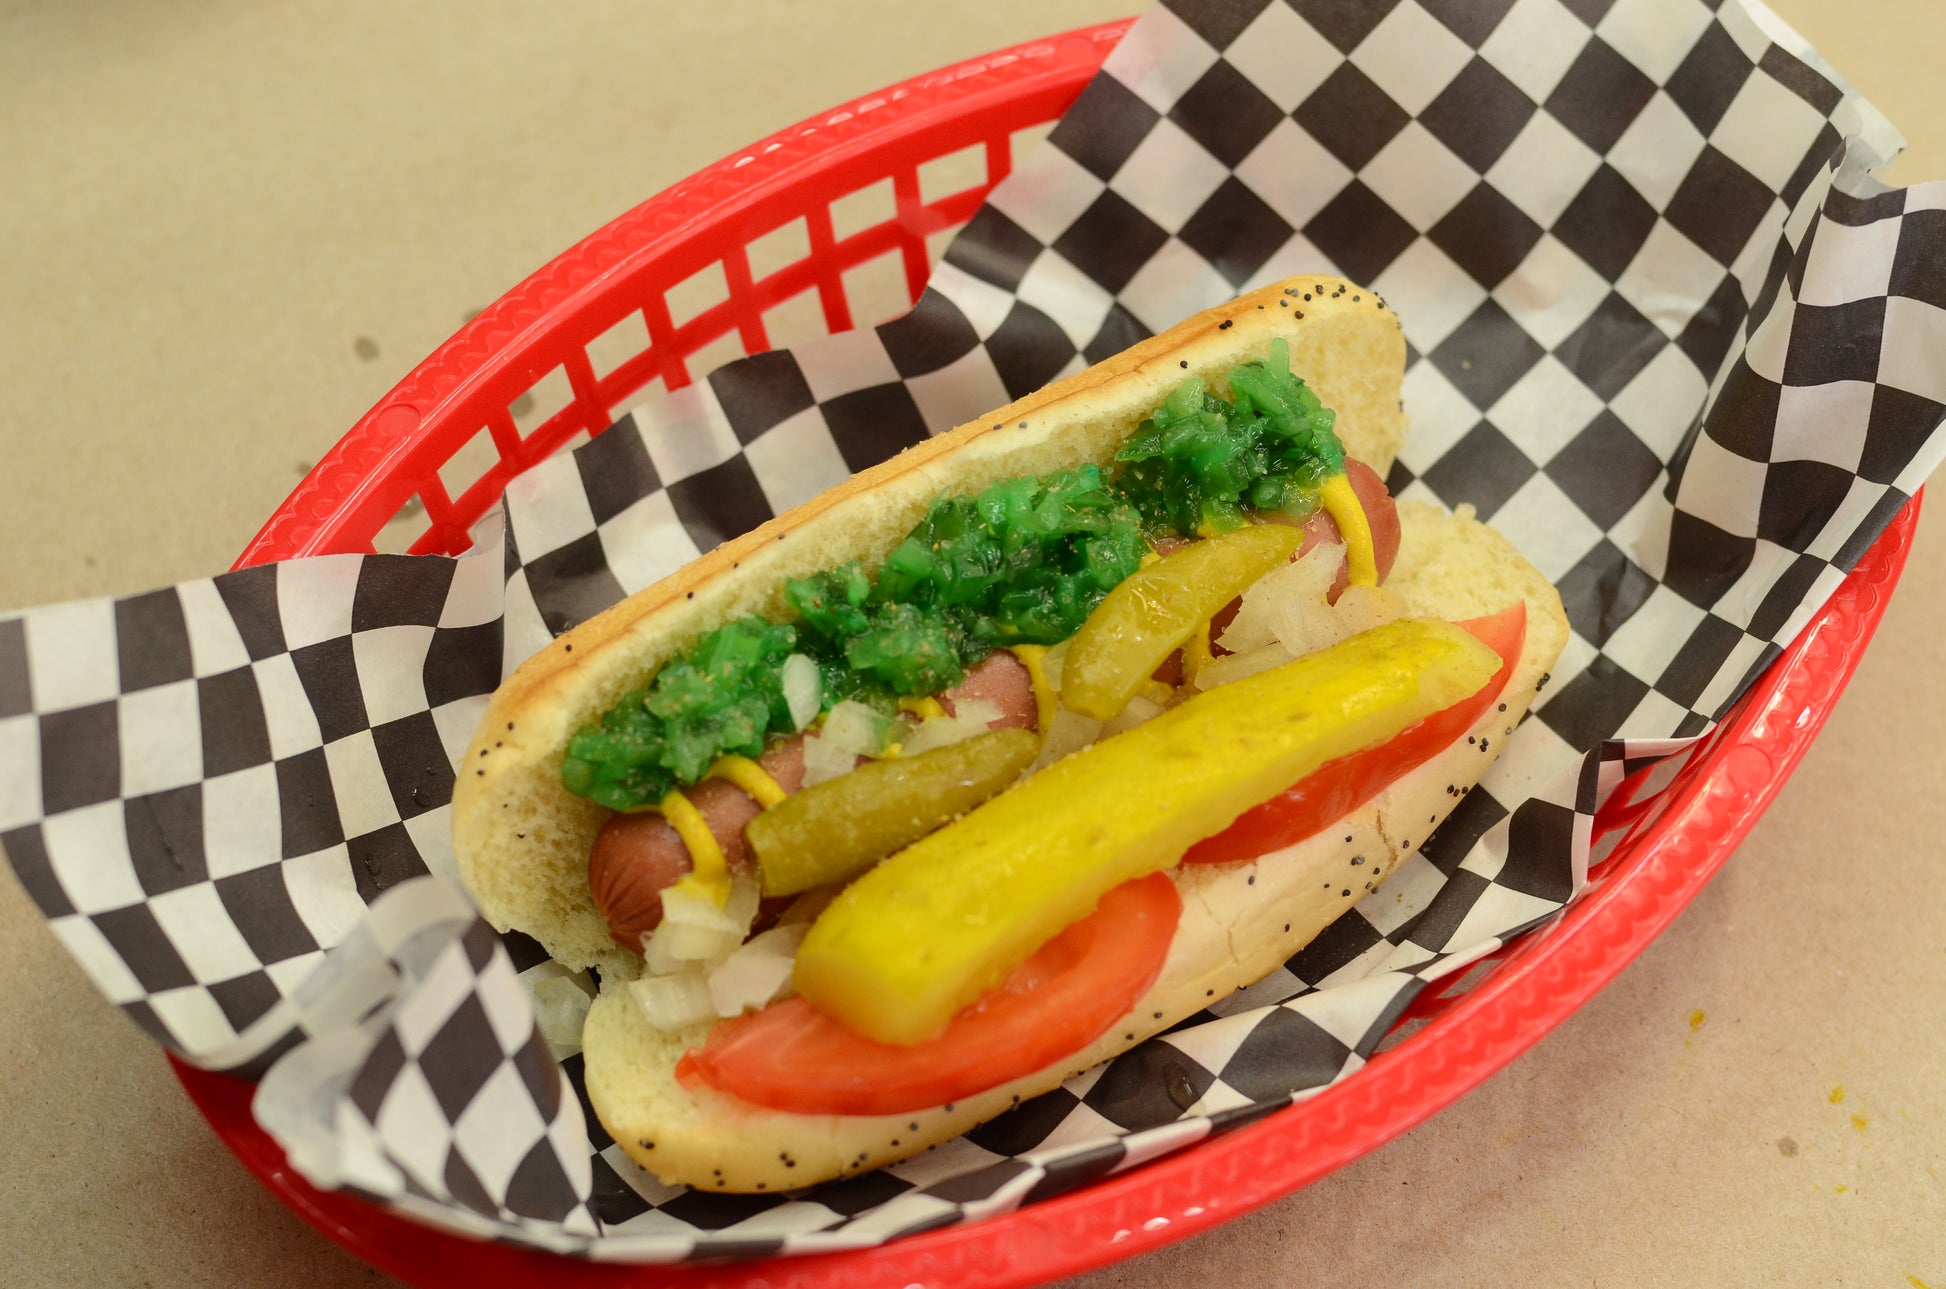 whats on a chicago hot dog